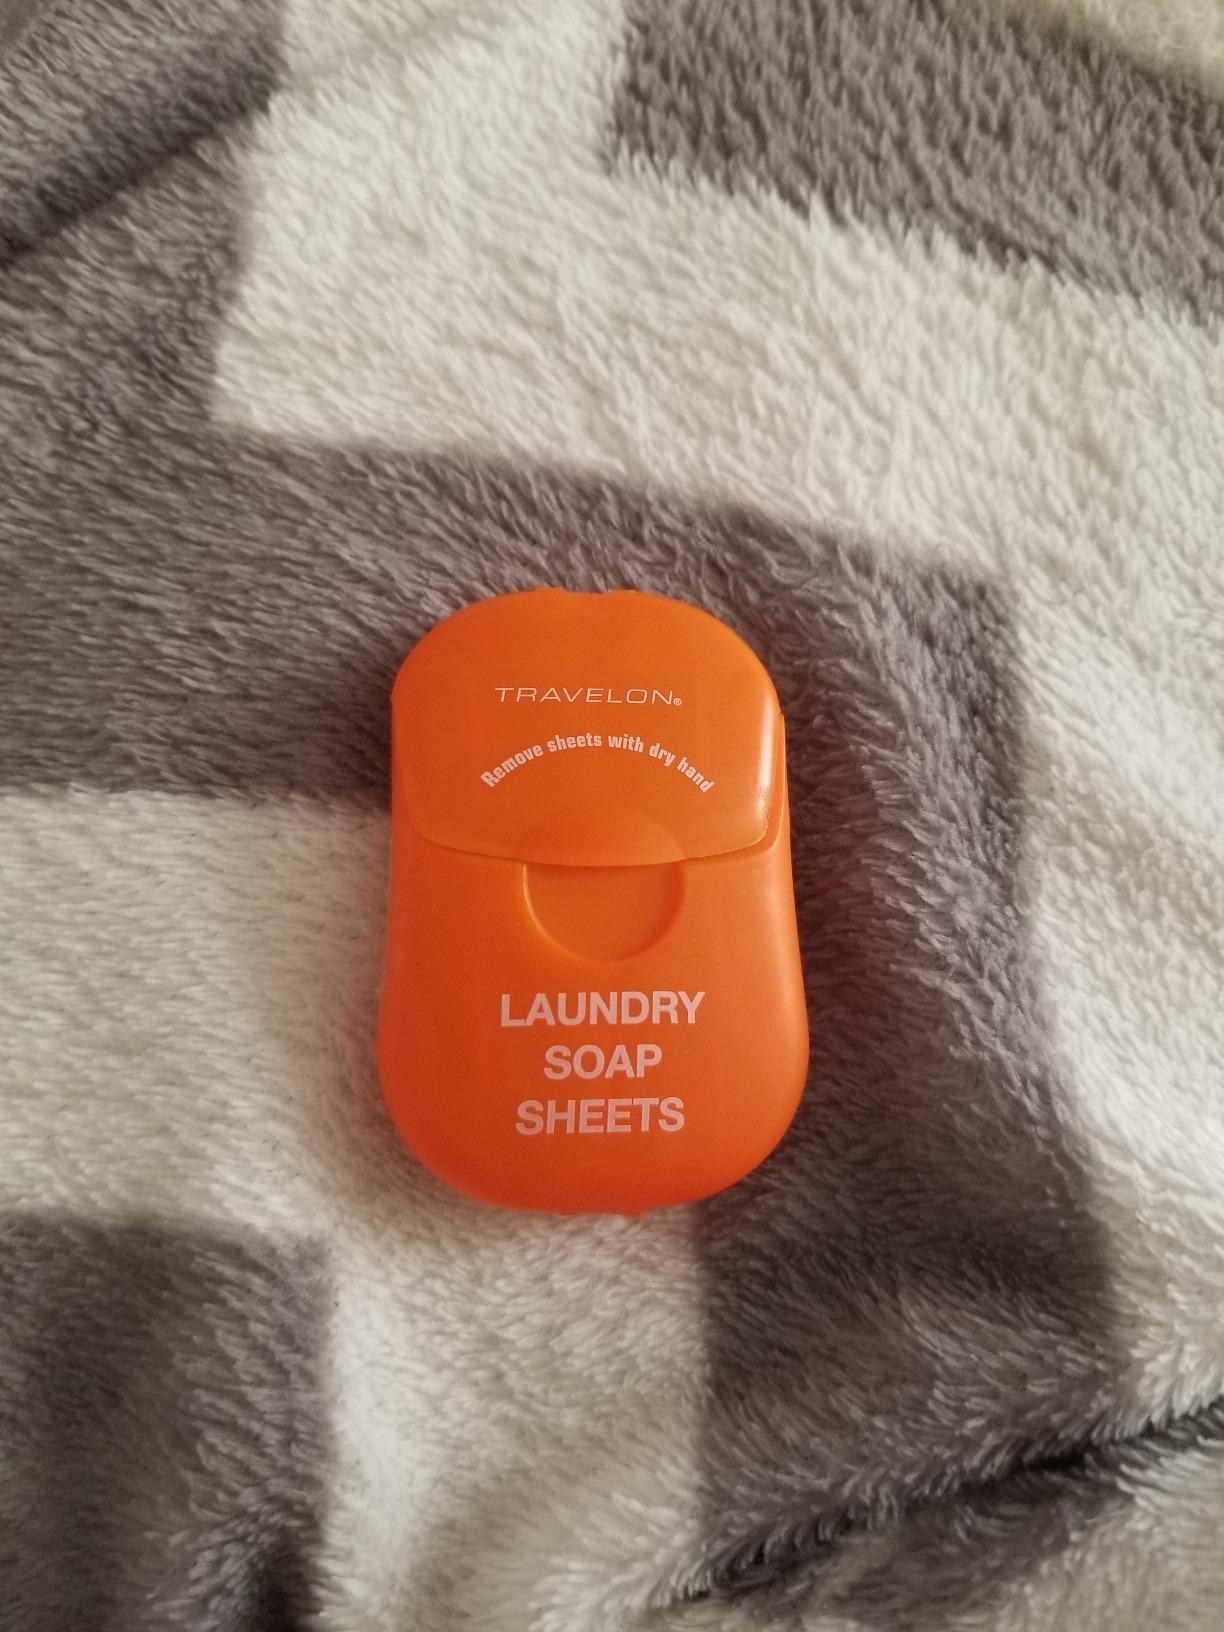 the soap sheets